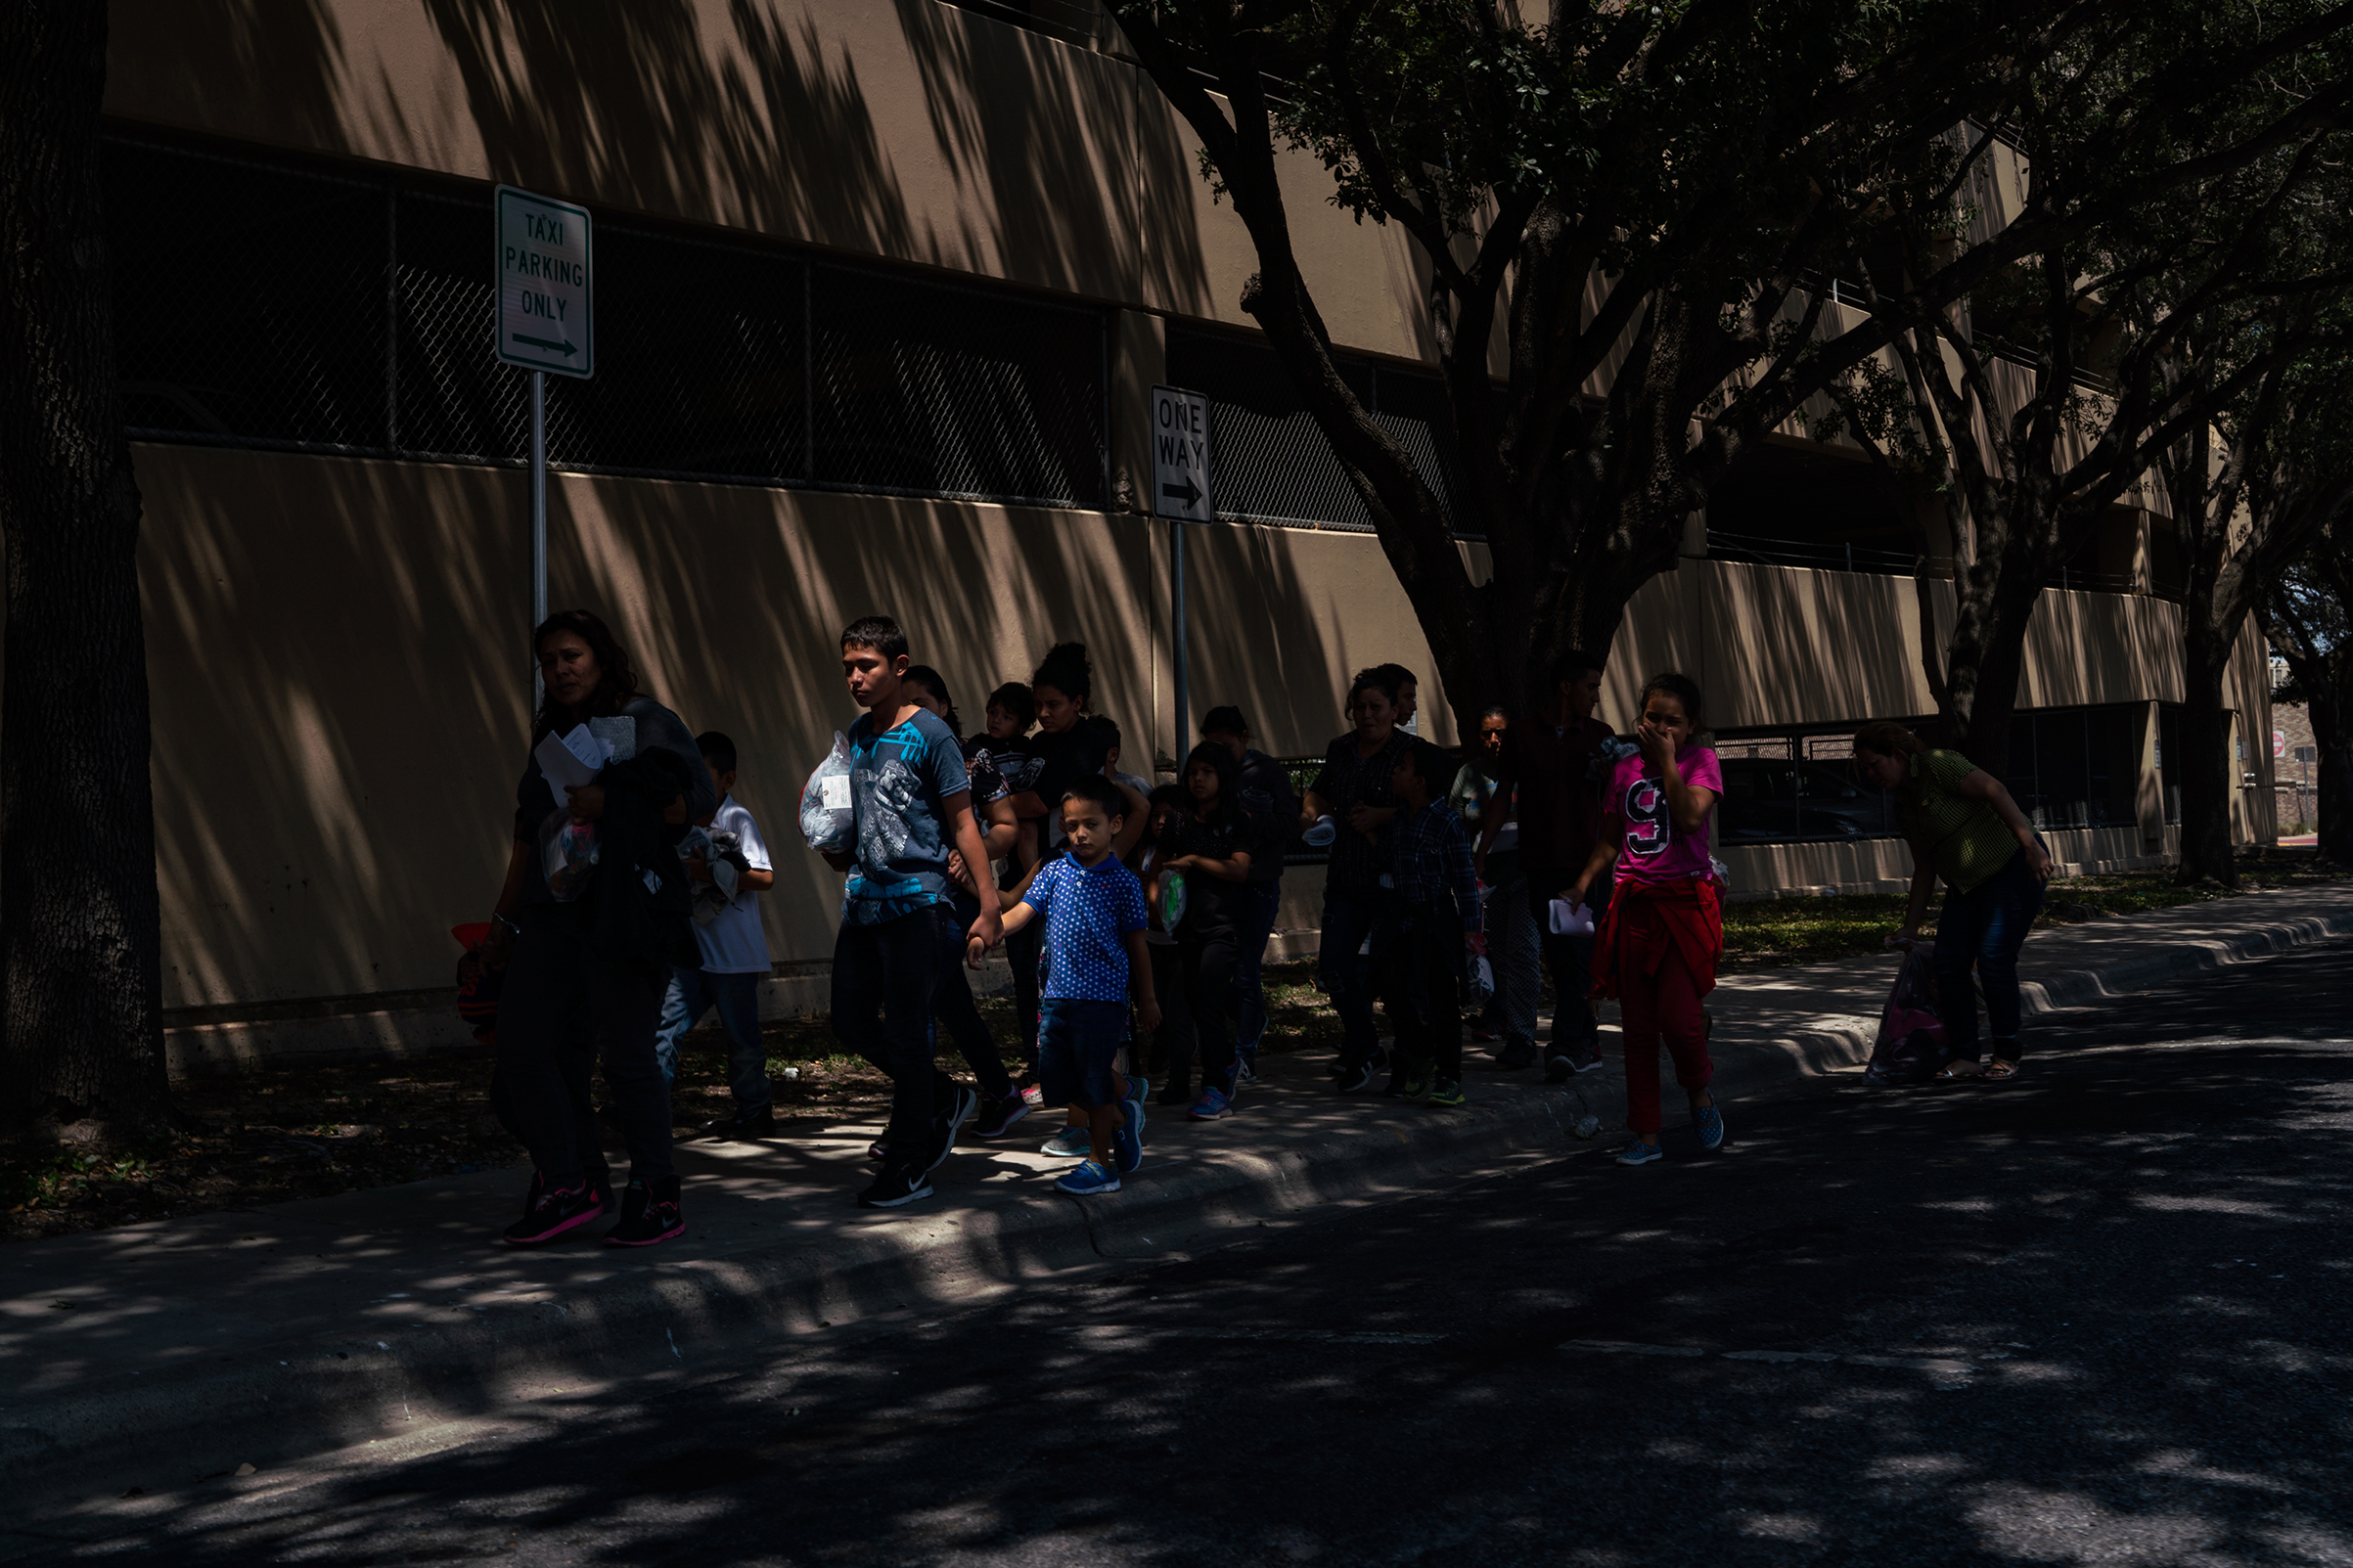 Central American asylum seekers walk to the nearby Catholic Charities Humanitarian Respite Center after being dropped off at the McAllen bus station on Aug. 2, 2018. (Verónica G. Cárdenas for The Texas Tribune)